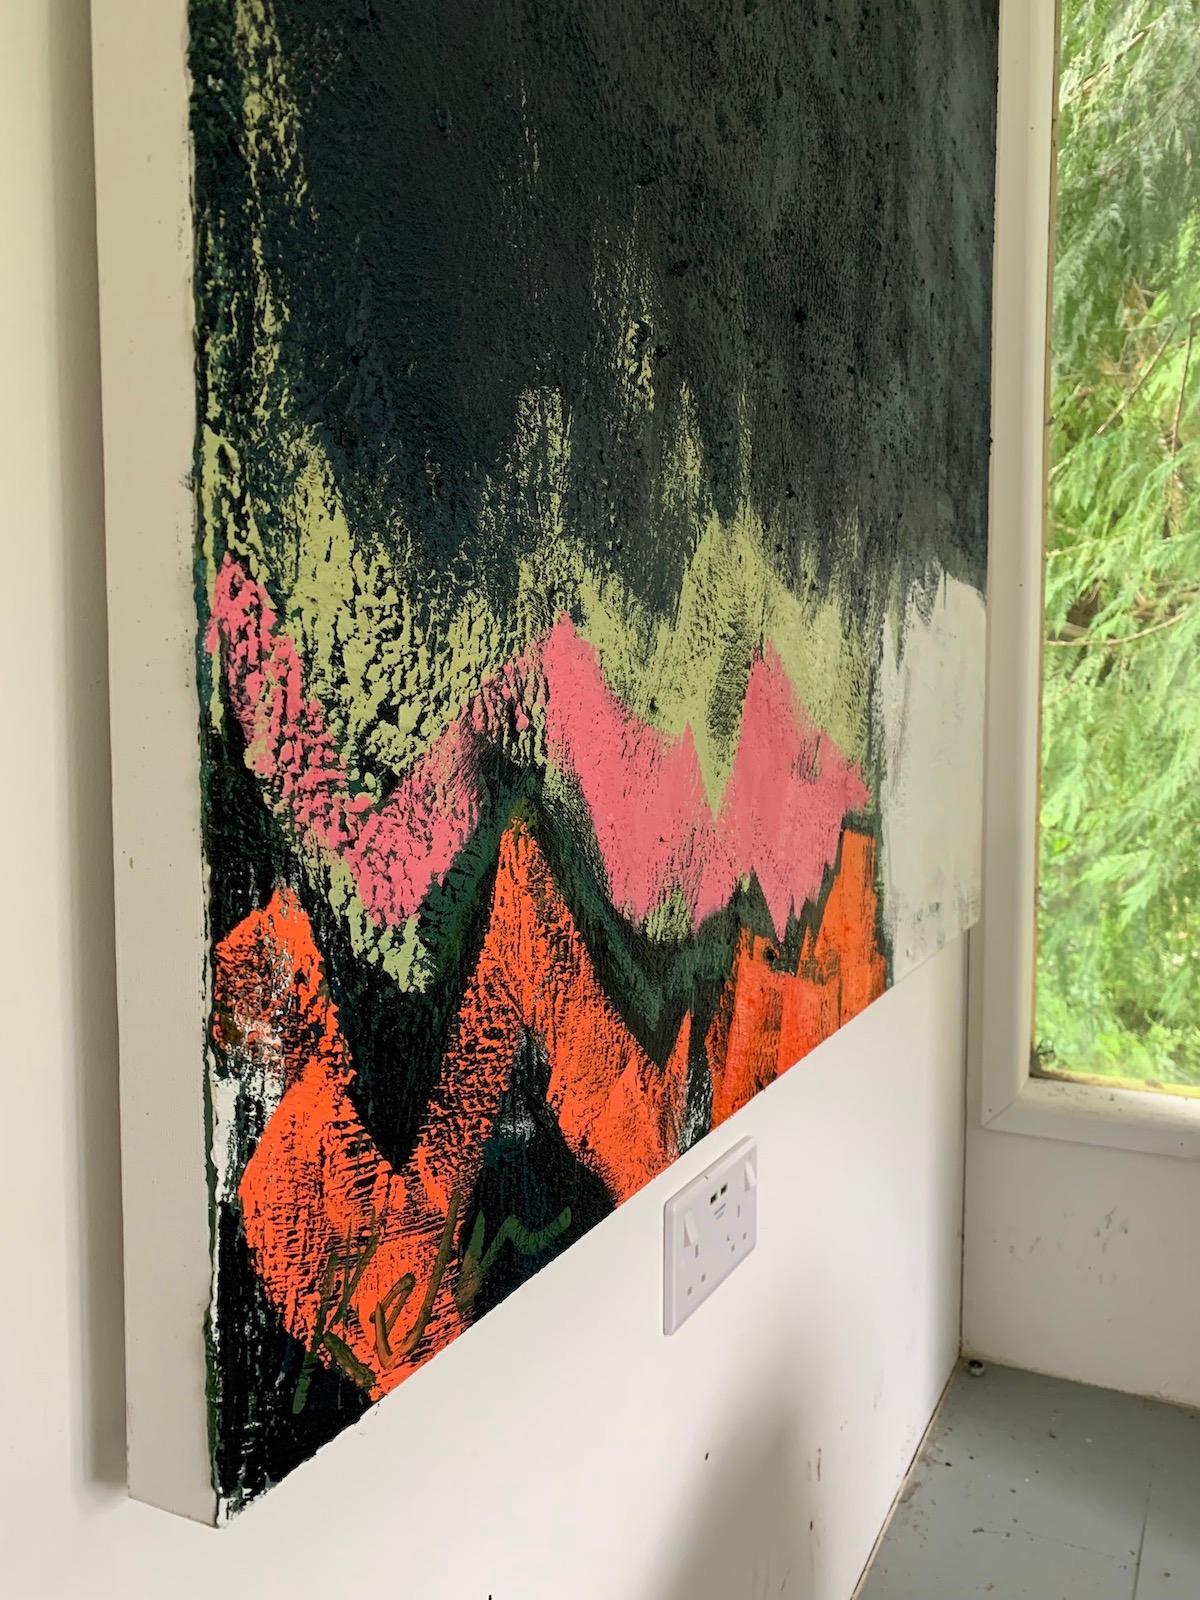 Original abstract oil painting on canvas, layers of dark blue space, anchored by bright pink, orange and white. Inspired by the Cornish coastal path in Zennor.
Kelly Washbourne, contemporary painter, available online and in our gallery at Wychwood